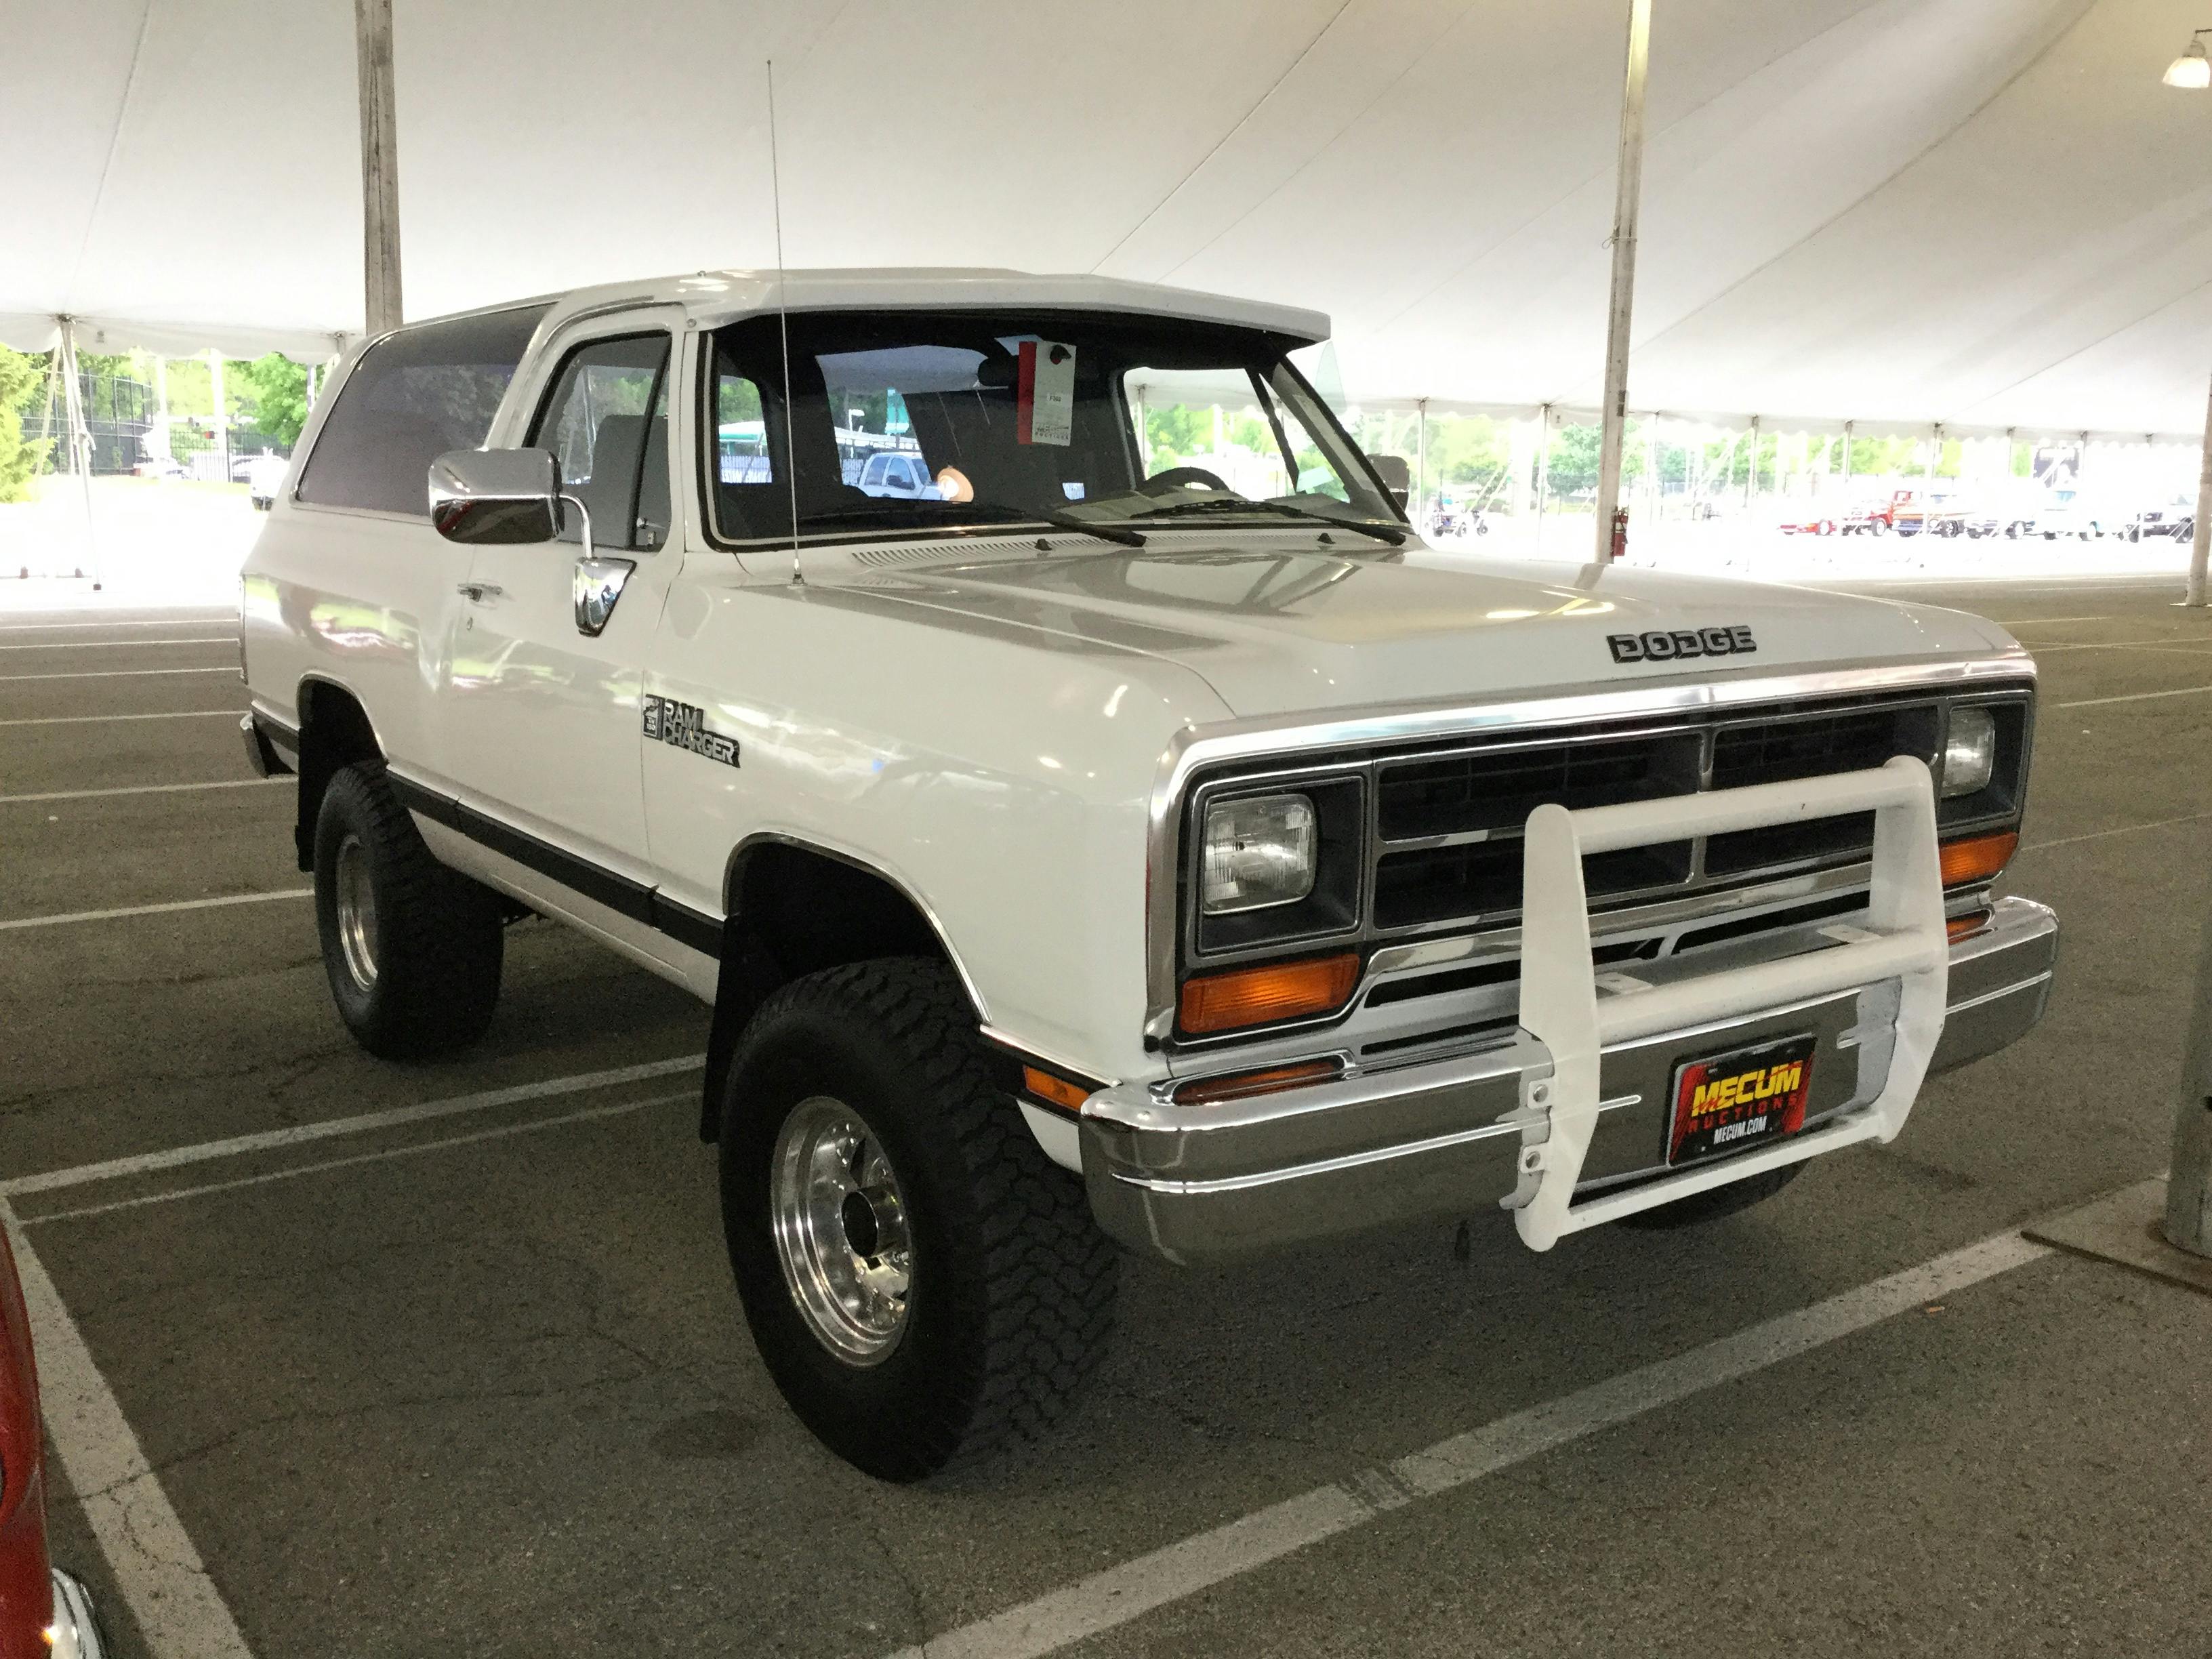 1990 Dodge Ramcharger AW-150 | Hagerty Valuation Tools